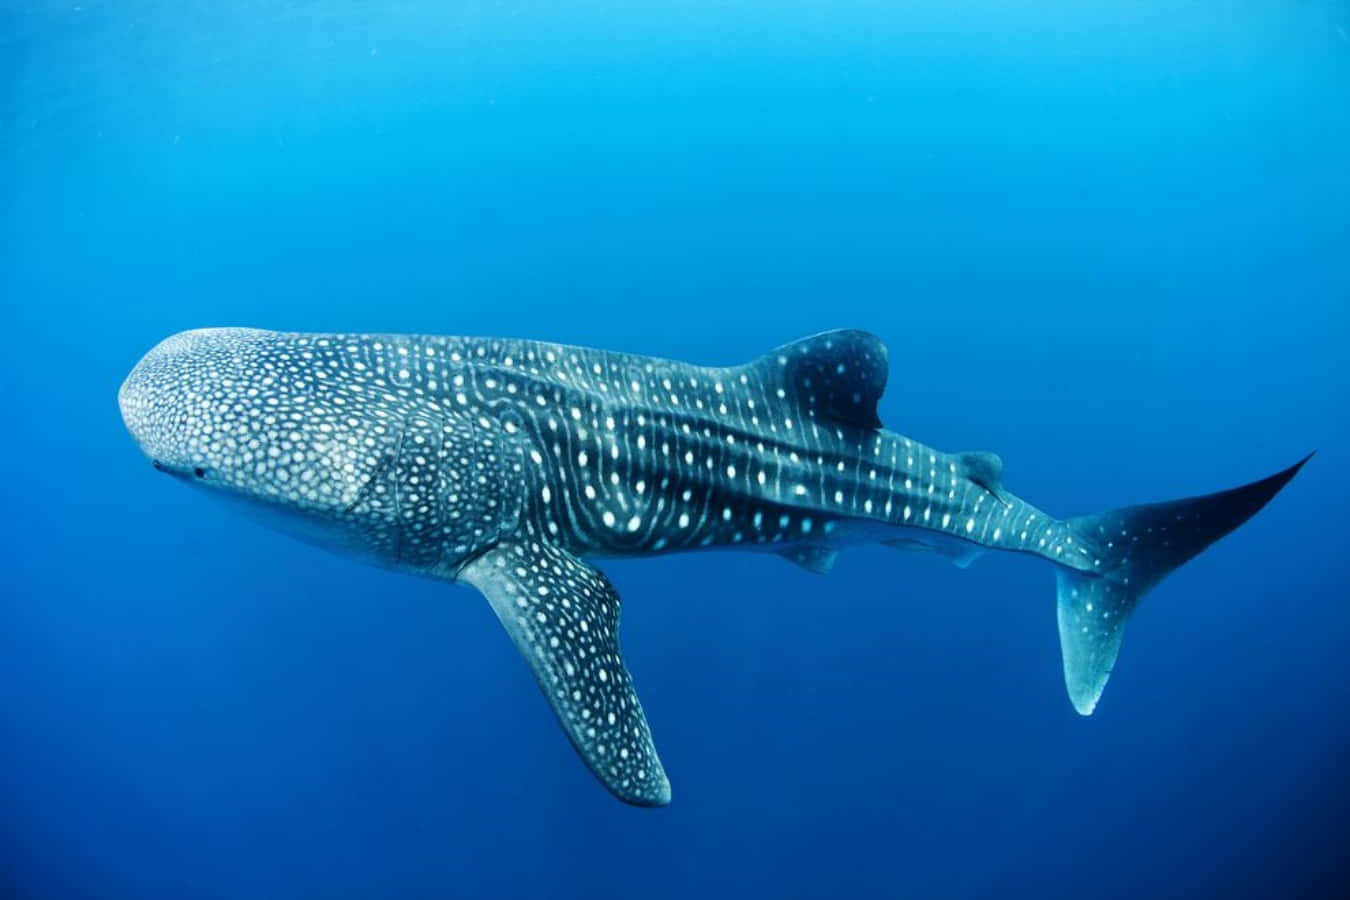 A whale shark leisurely swimming in the open ocean.